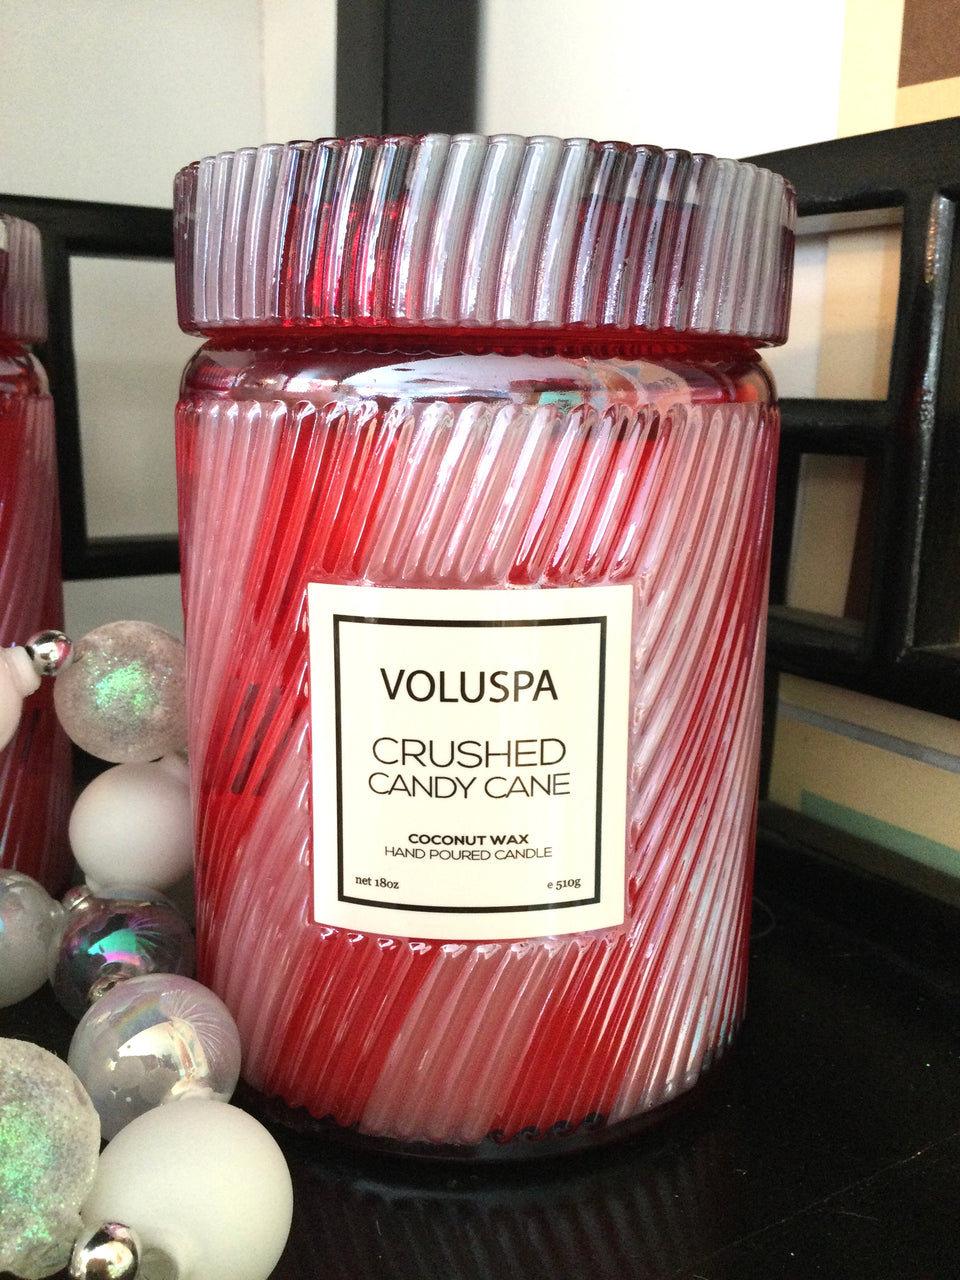 Crushed candy cane candle